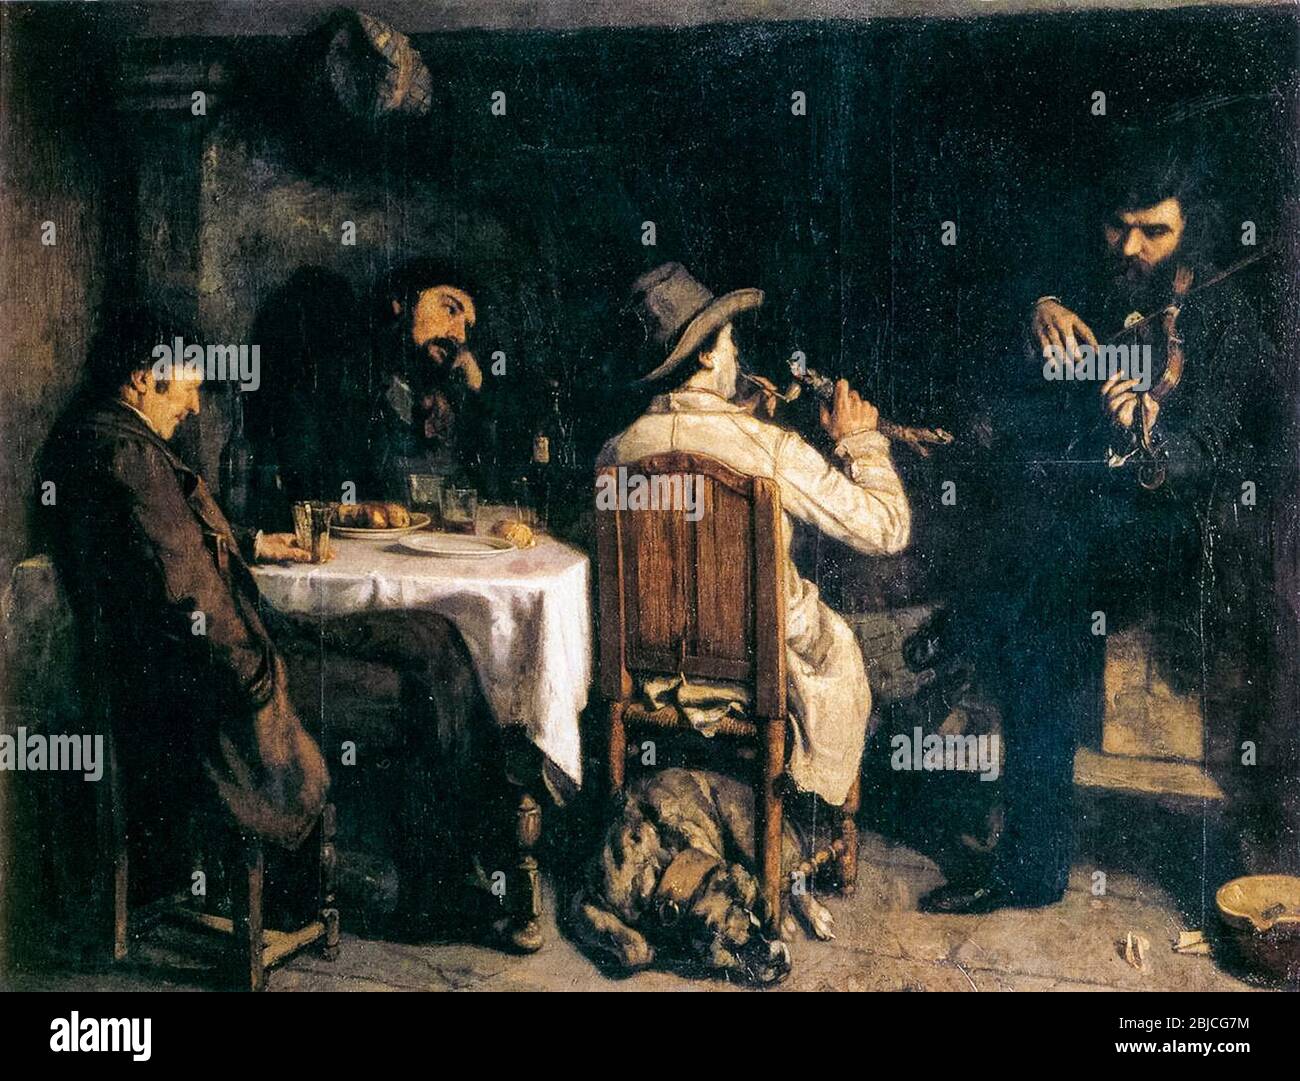 Gustave Courbet, After Dinner at Ornans, painting, 1849 Stock Photo